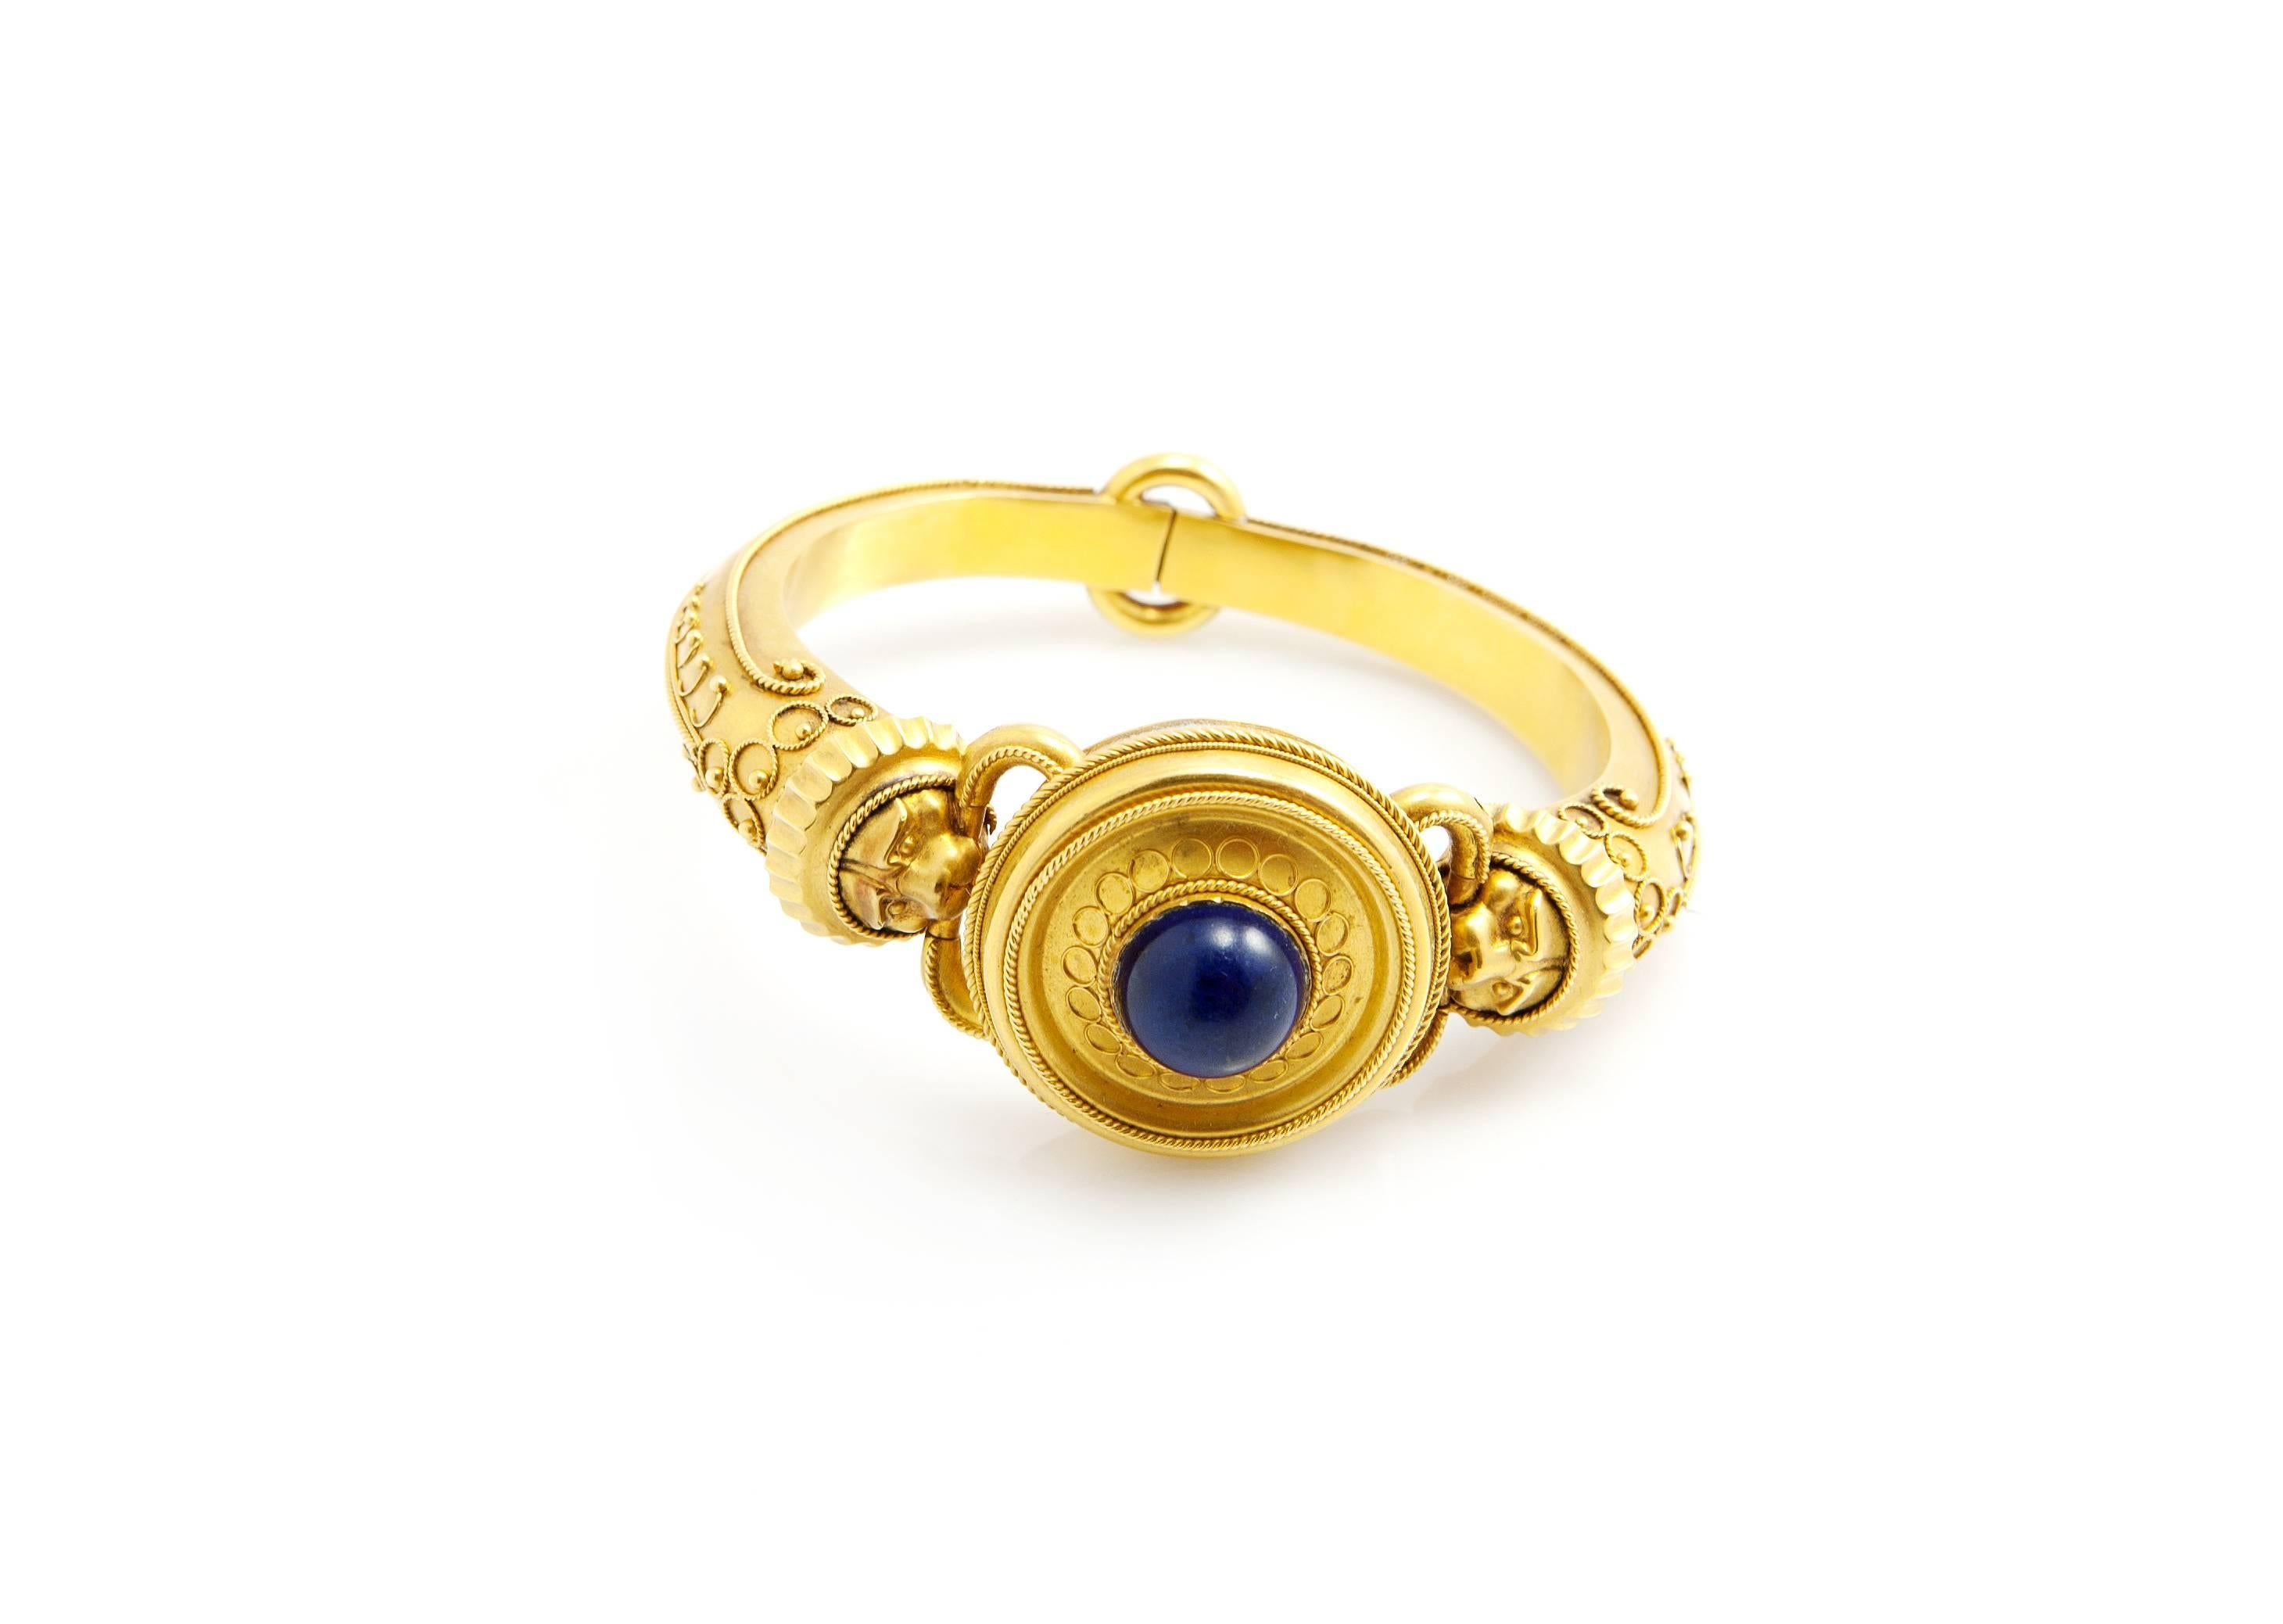 Gold and Lapis Lazuli Etruscan Revival Parure, French, circa 1870 For Sale 1